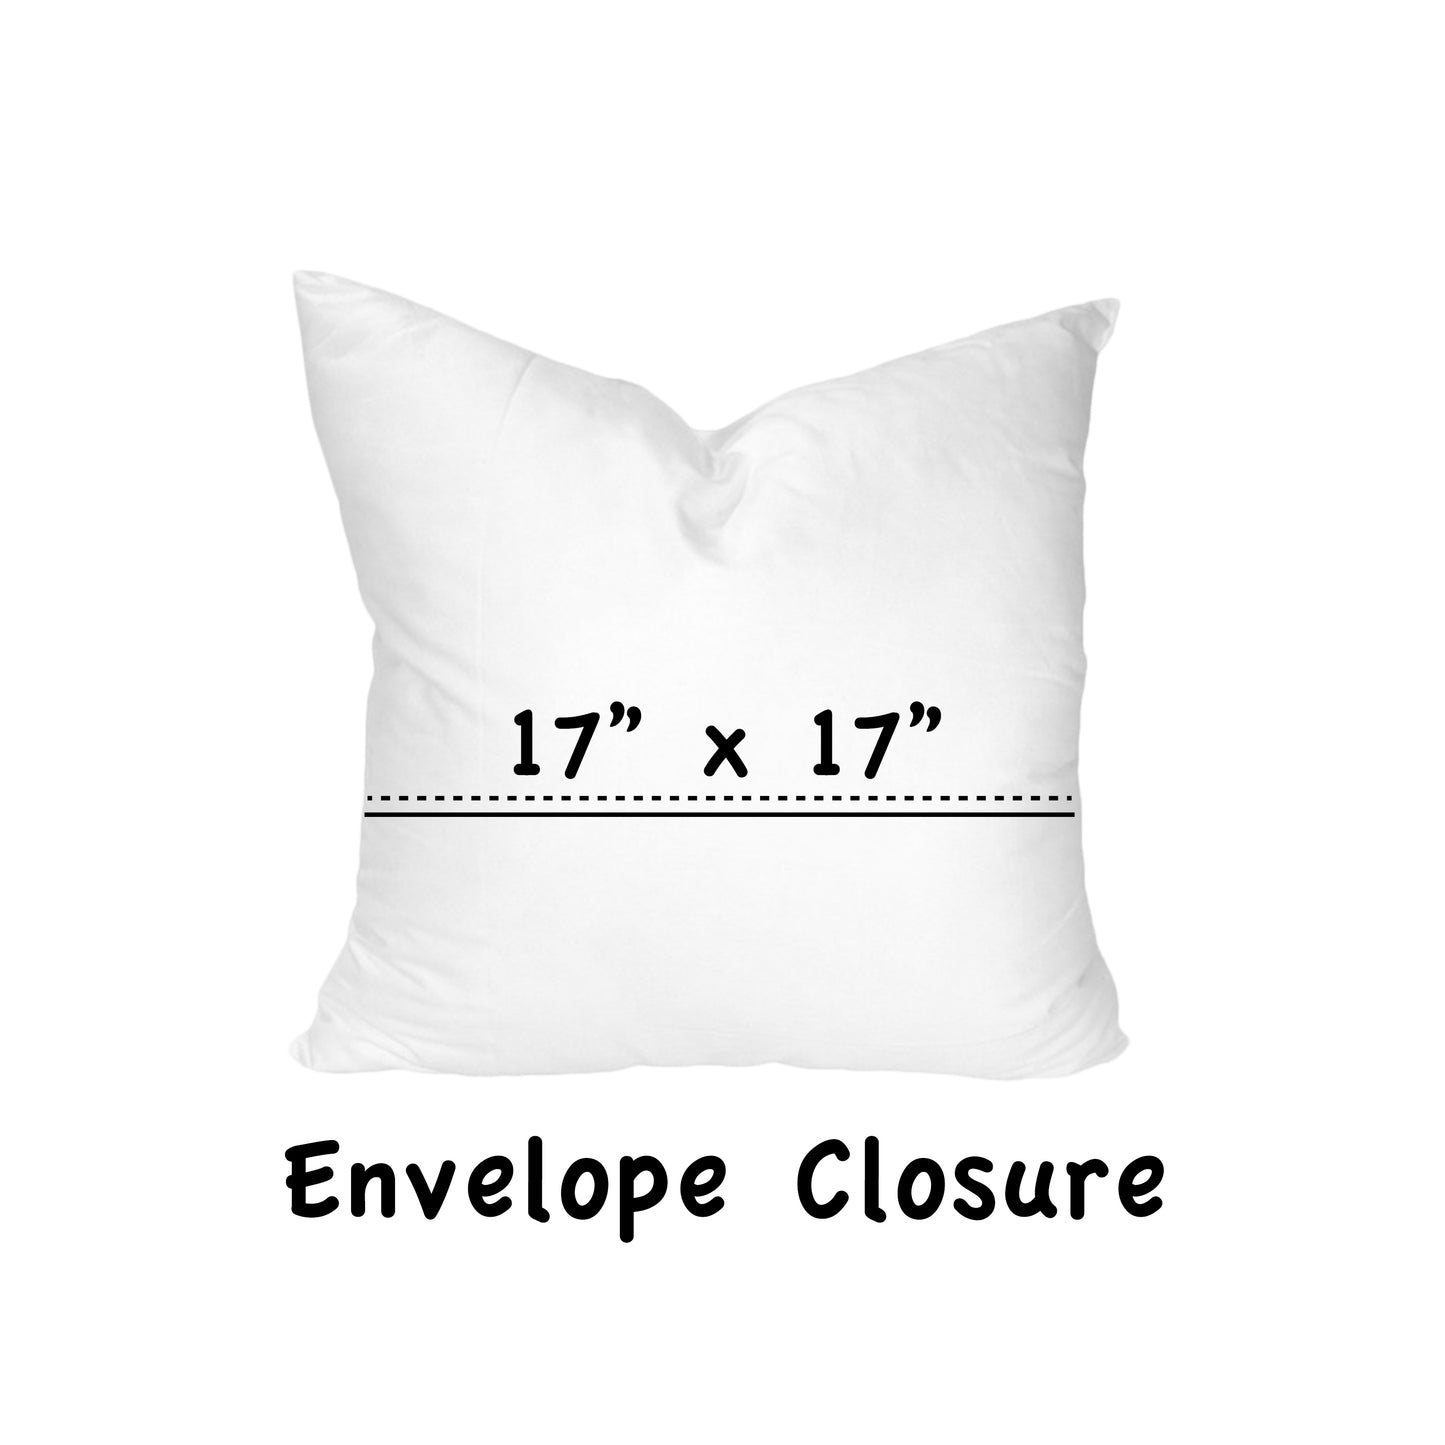 CUBE Indoor/Outdoor Soft Royal Pillow, Envelope Cover Only, 17x17